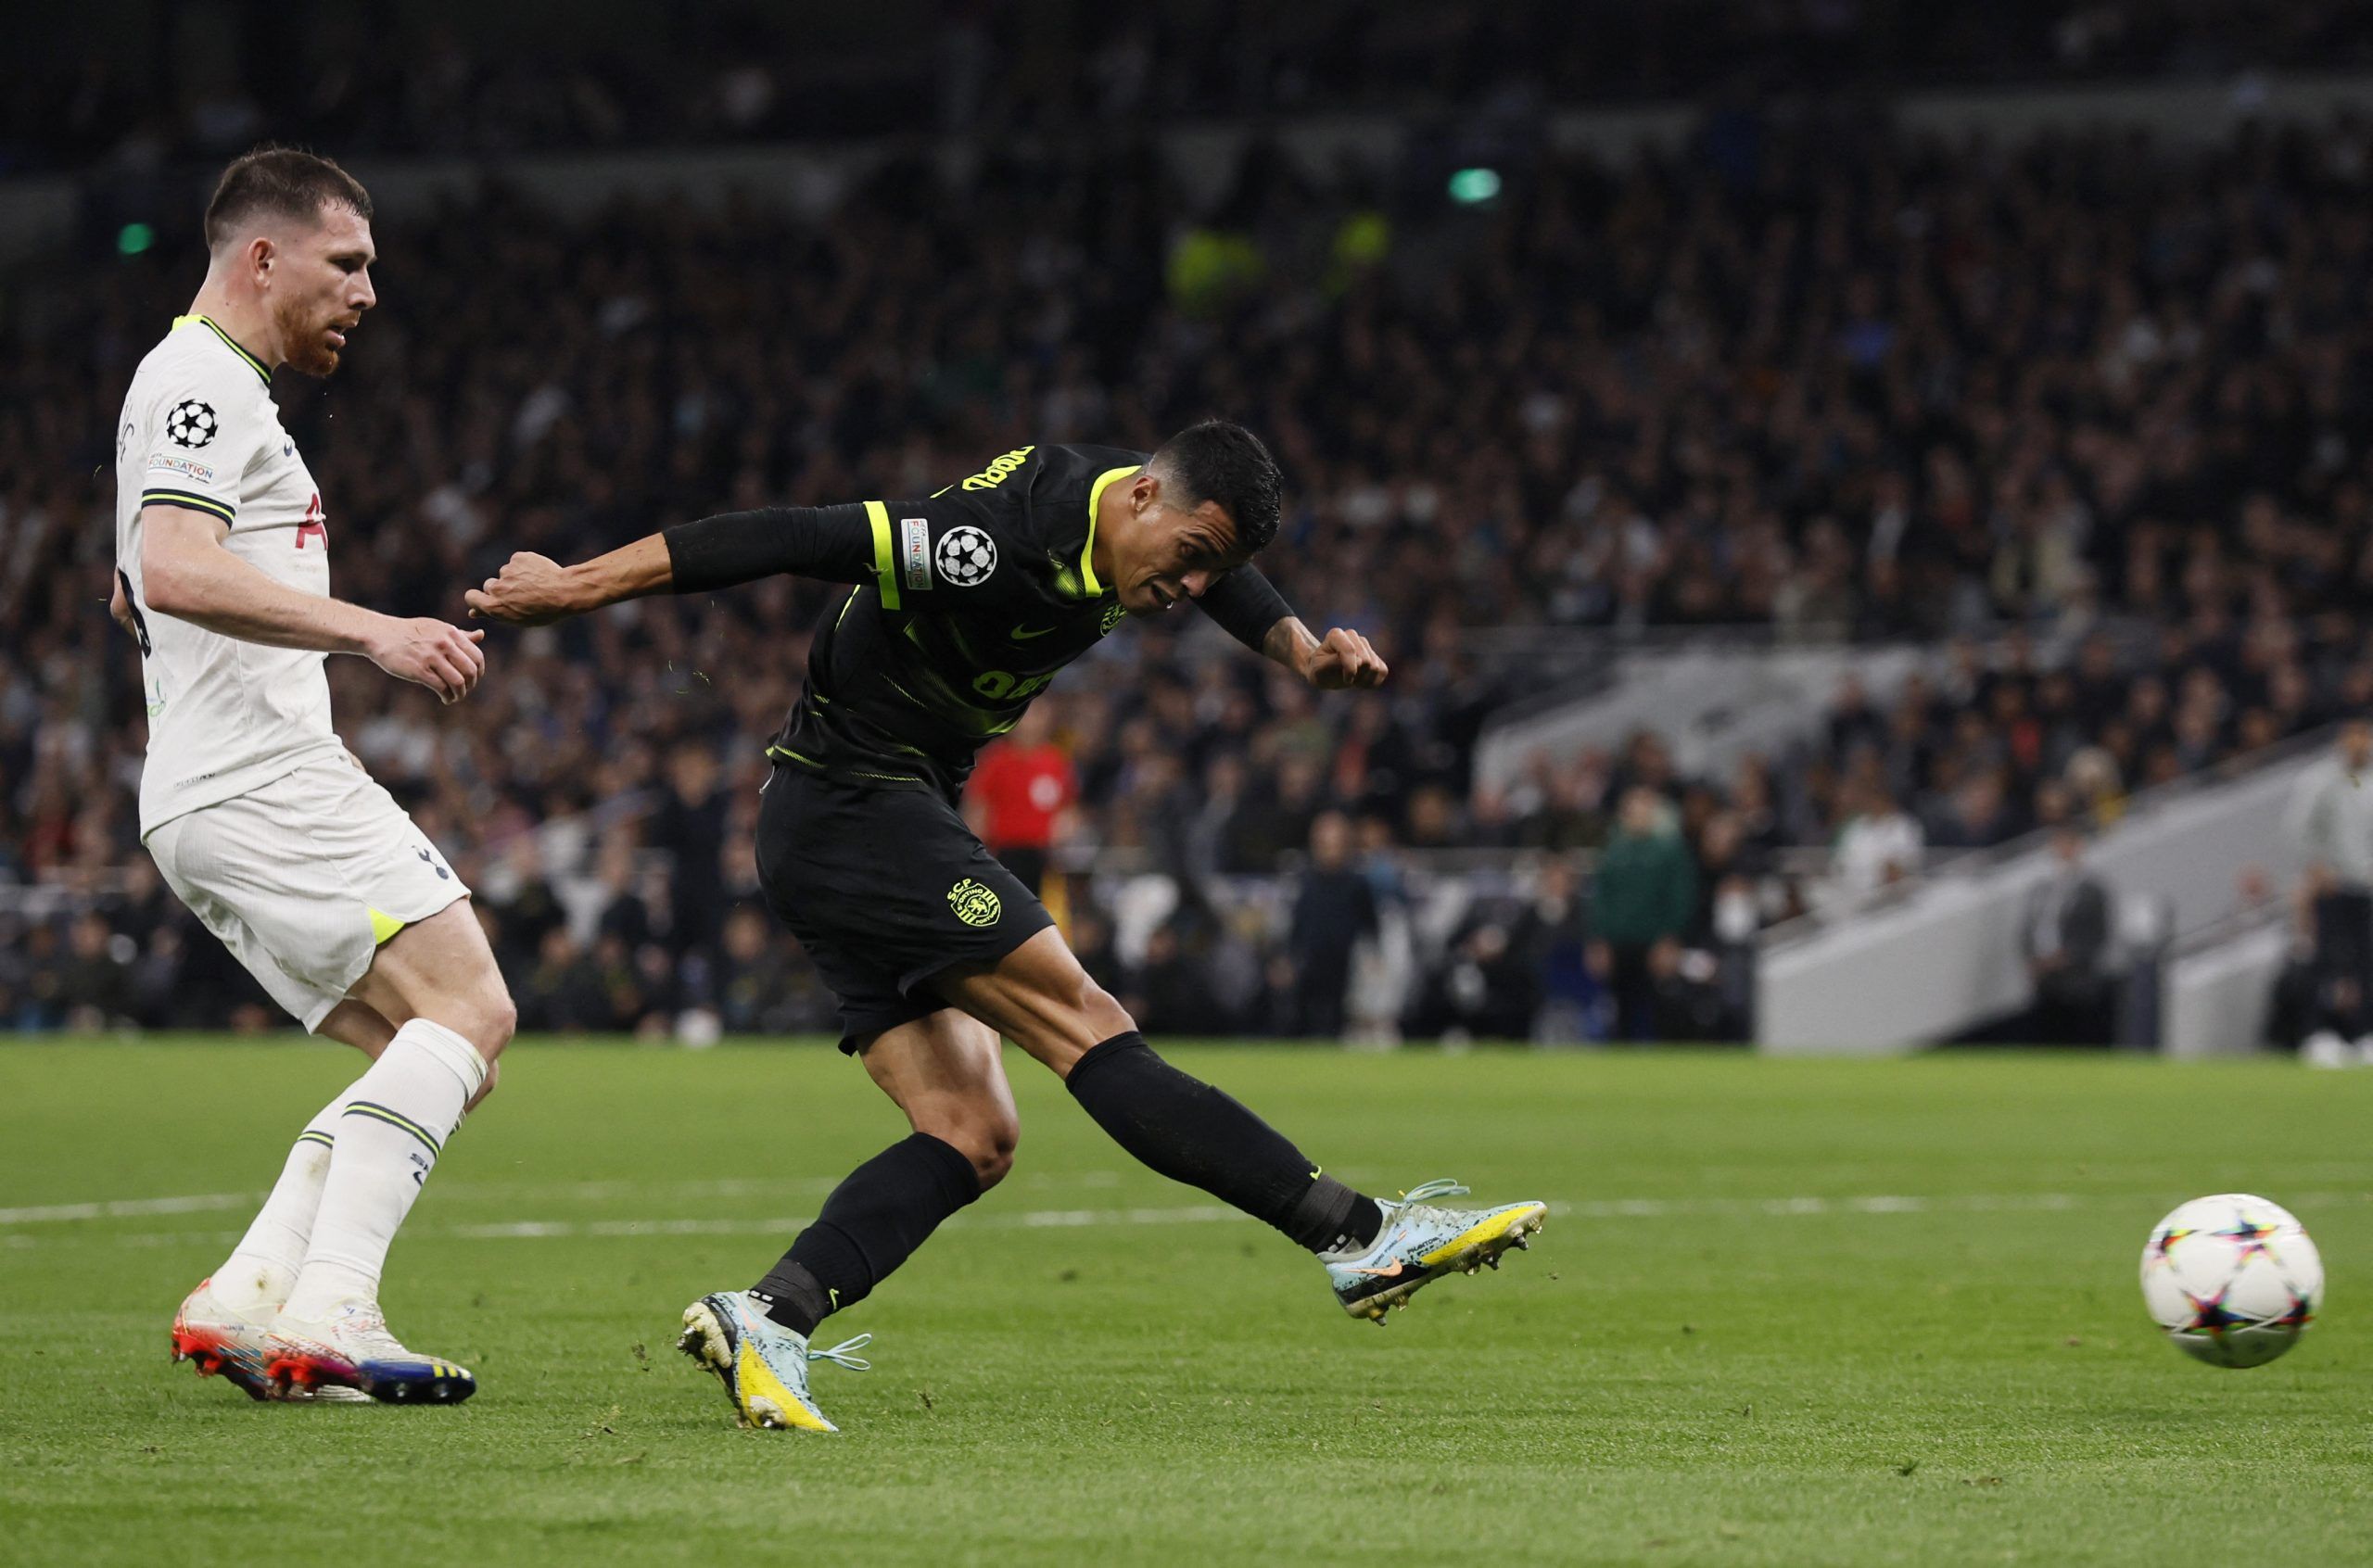 Soccer Football - Champions League - Group D - Tottenham Hotspur v Sporting CP - Tottenham Hotspur Stadium, London, Britain - October 26, 2022  Sporting CP's Pedro Porro in action with Tottenham Hotspur's Pierre-Emile Hojbjerg  Action Images via Reuters/Andrew Couldridge